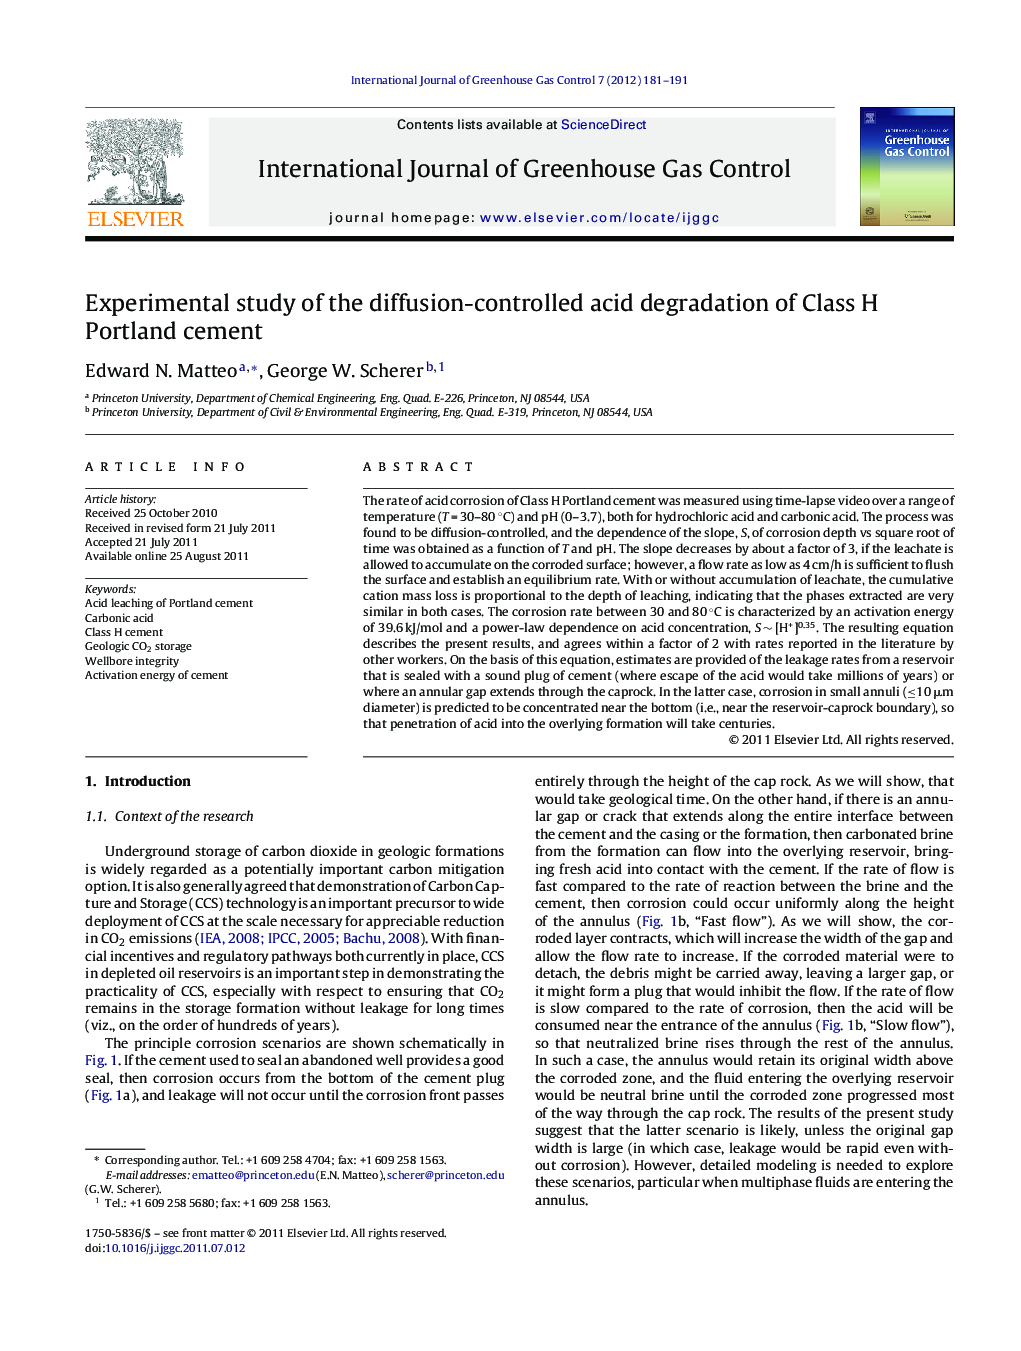 Experimental study of the diffusion-controlled acid degradation of Class H Portland cement